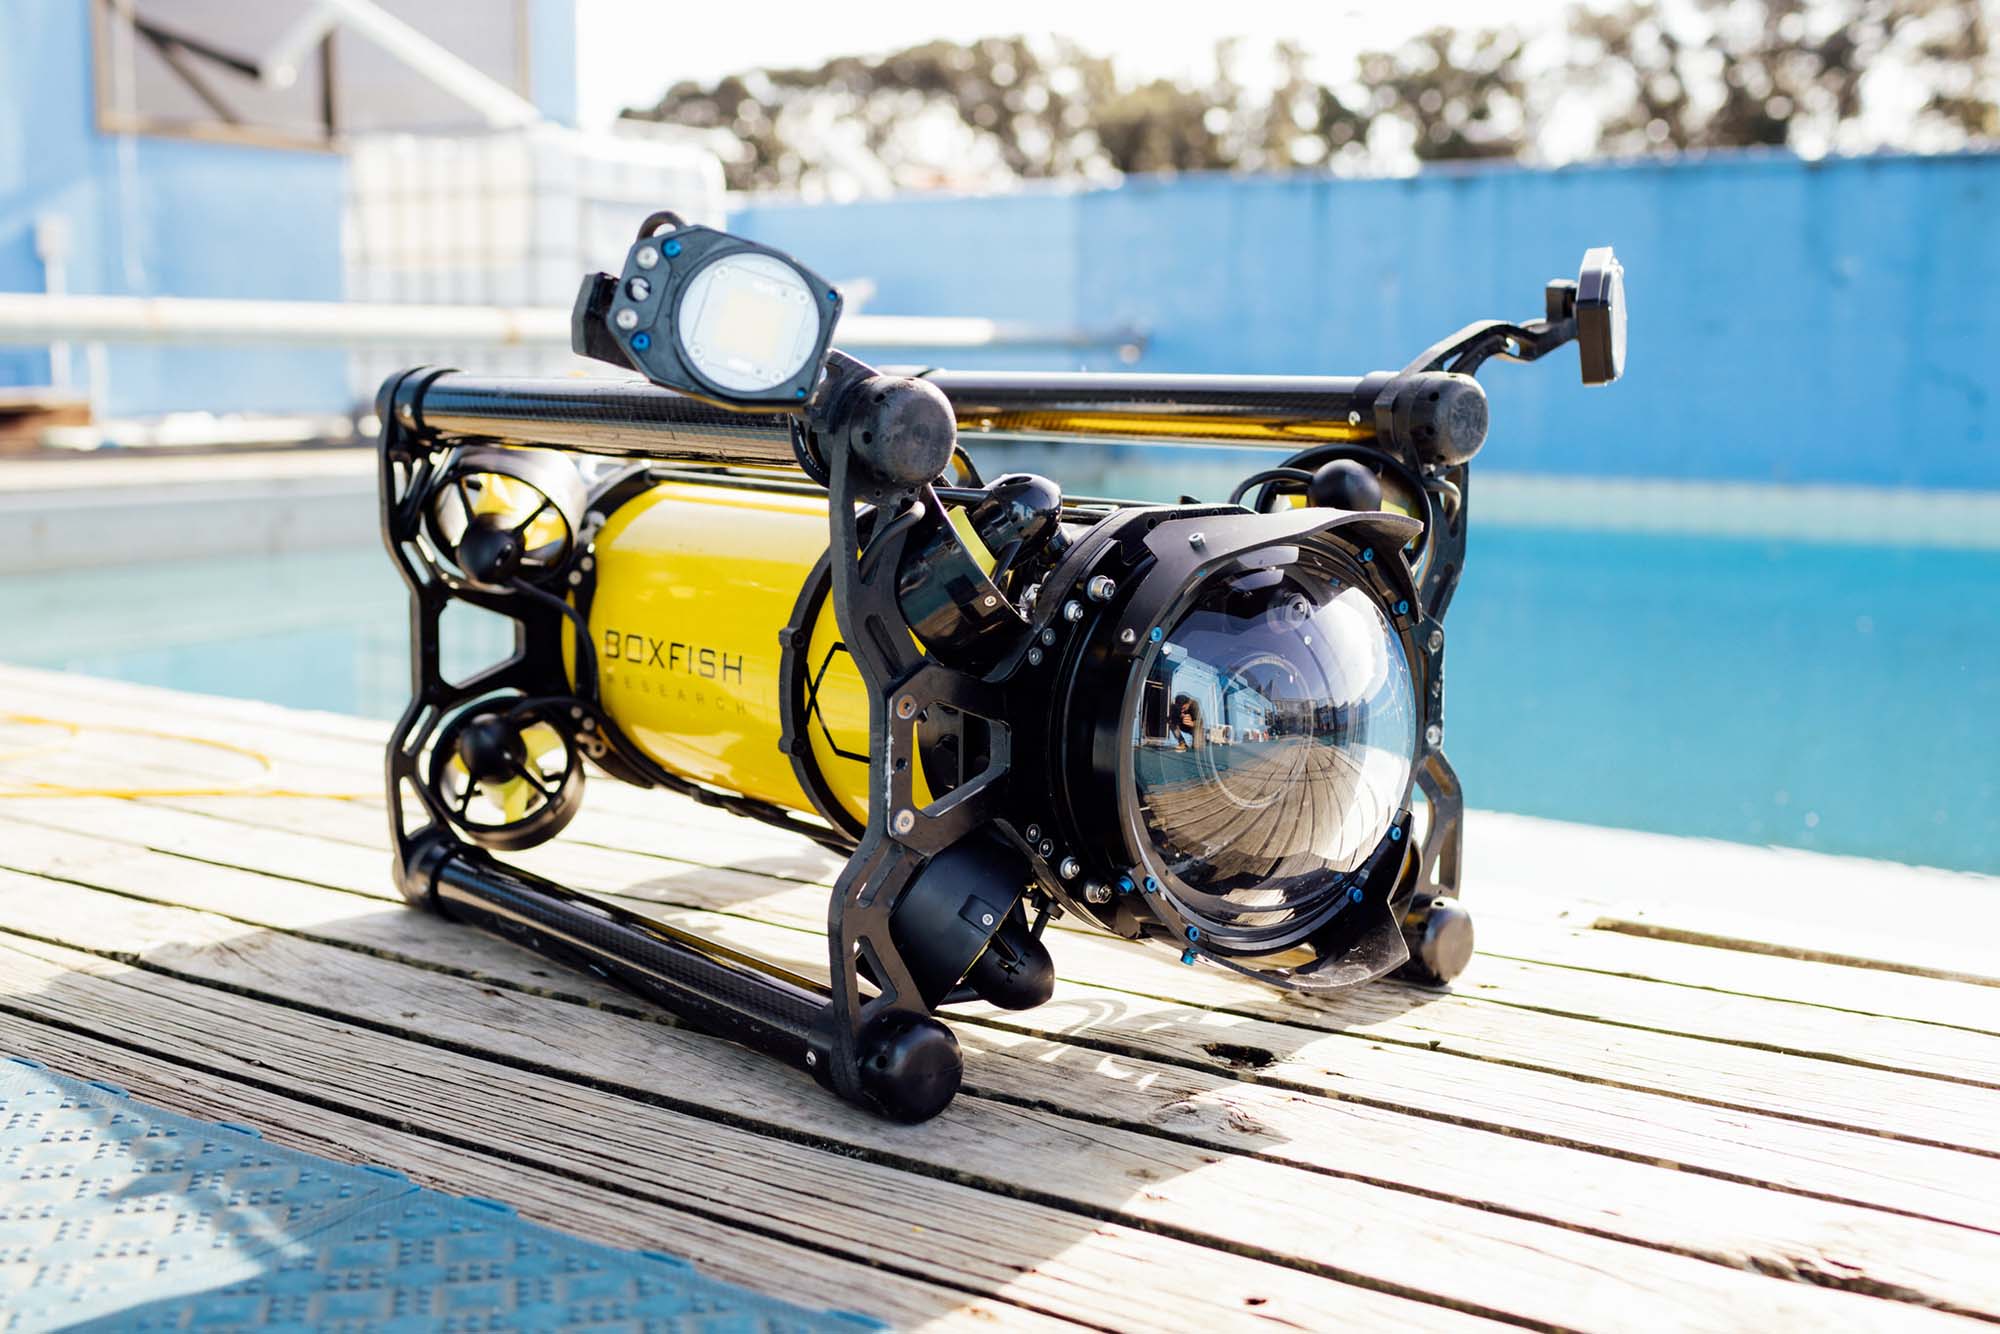 Boxfish ROV Poolside at the Underwater Cinematography Course